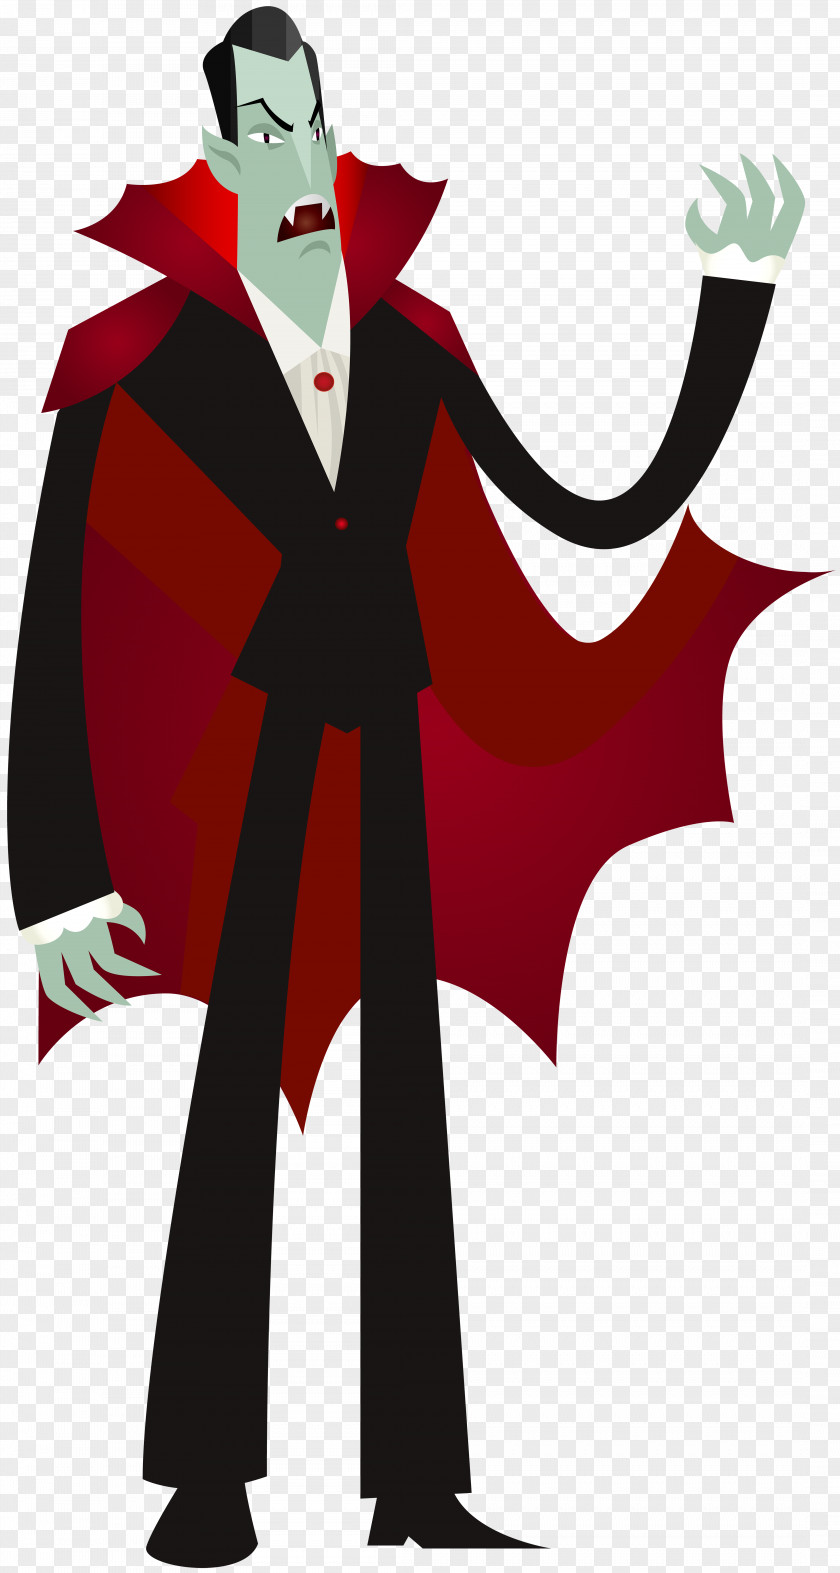 Vampire Clip Art Image File Formats Lossless Compression PNG